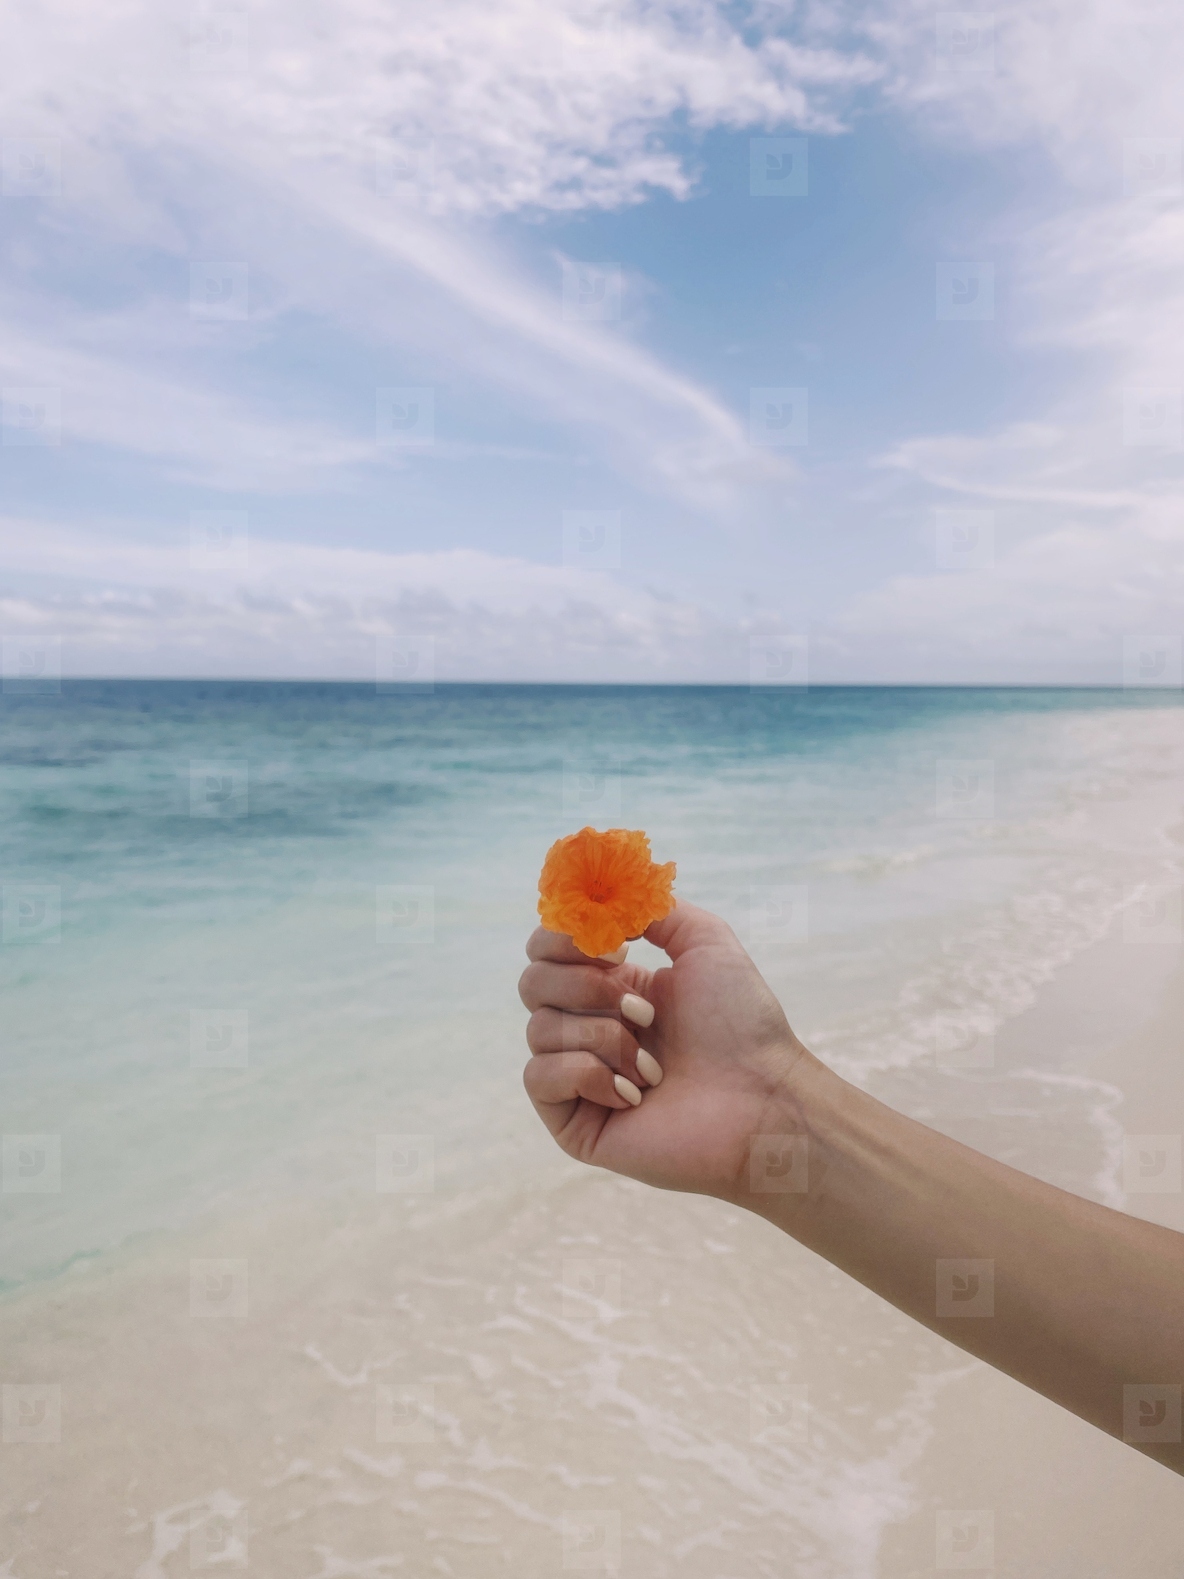 Hand of an unrecognizable woman holding an orange flower against the ocean